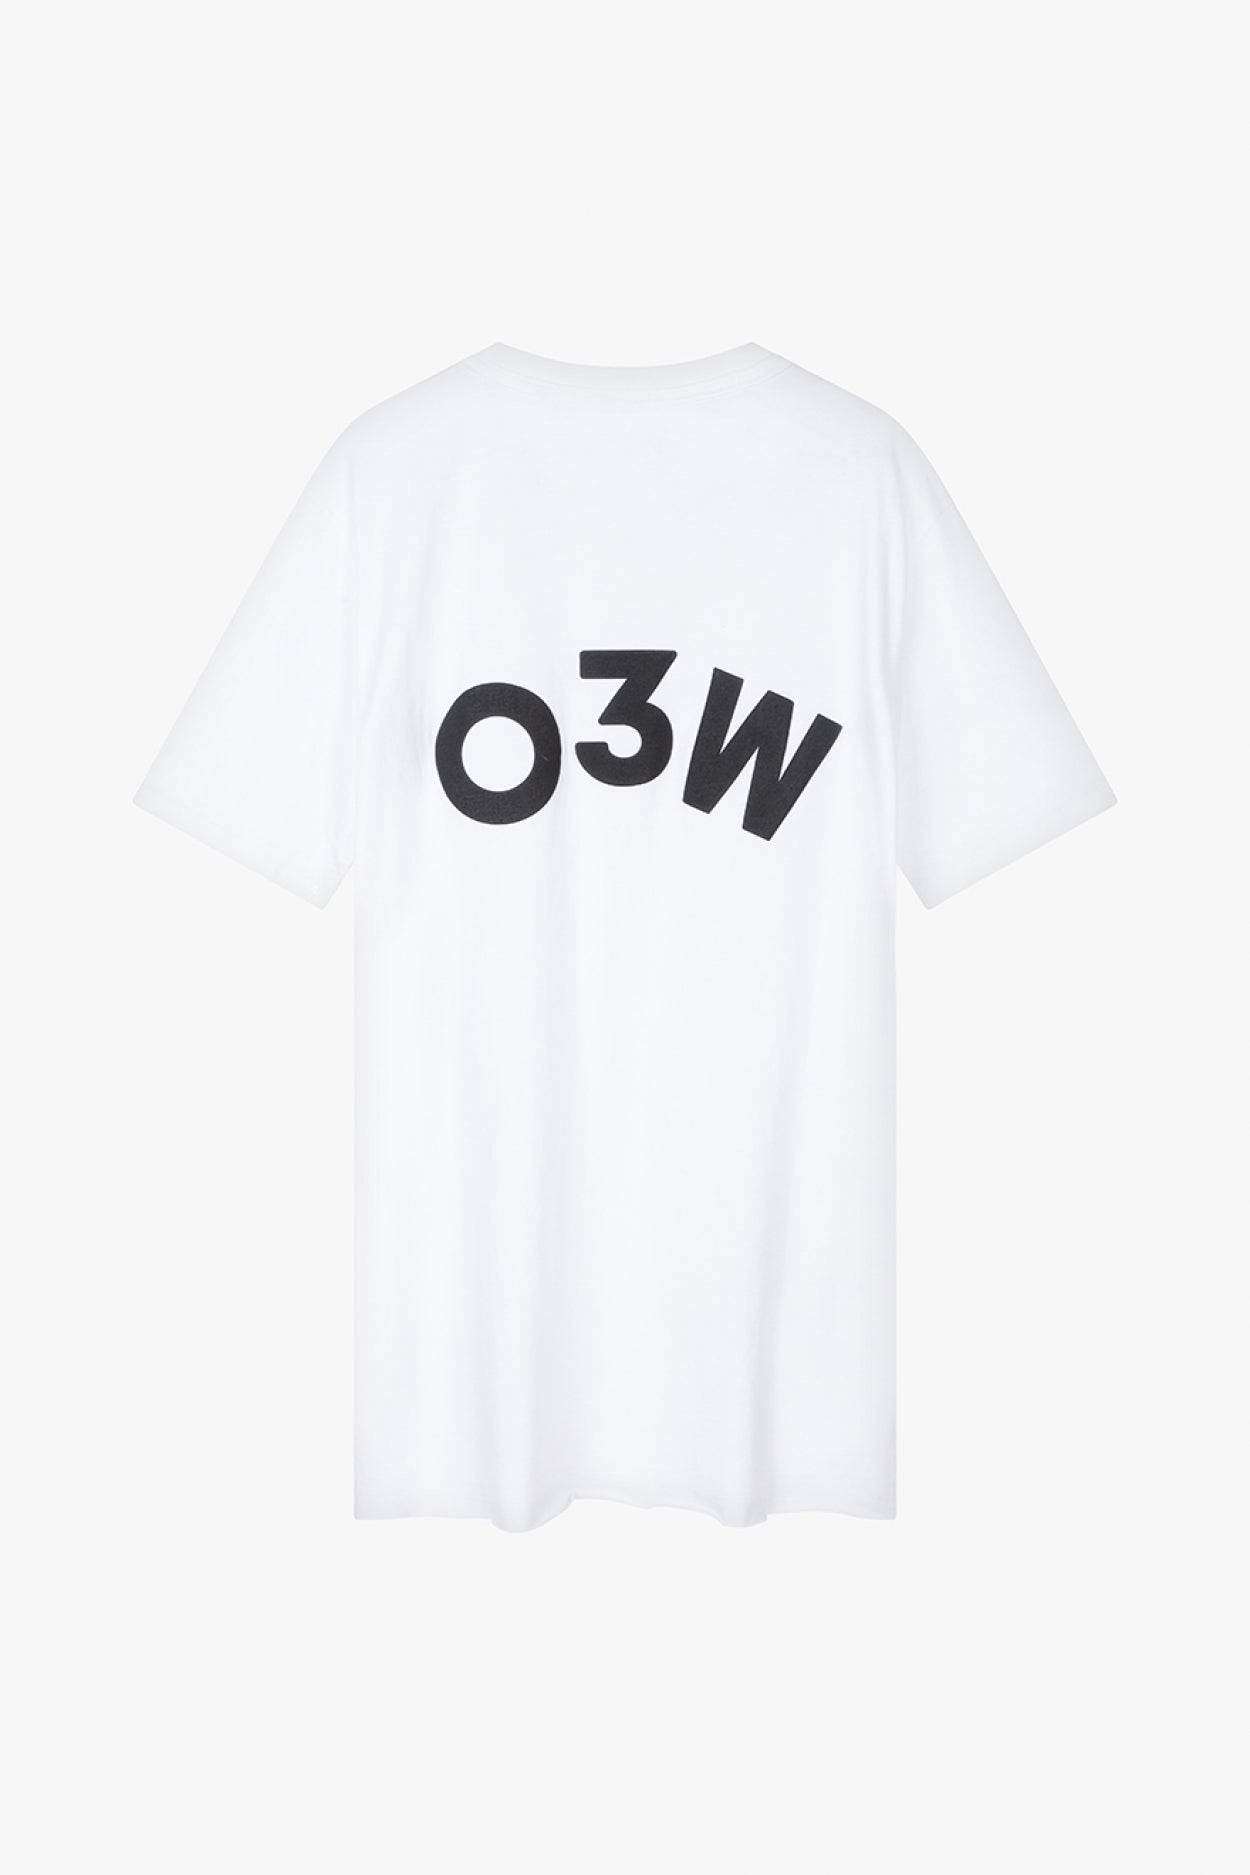 Rep SS Tee | white - Once We Were Warriors